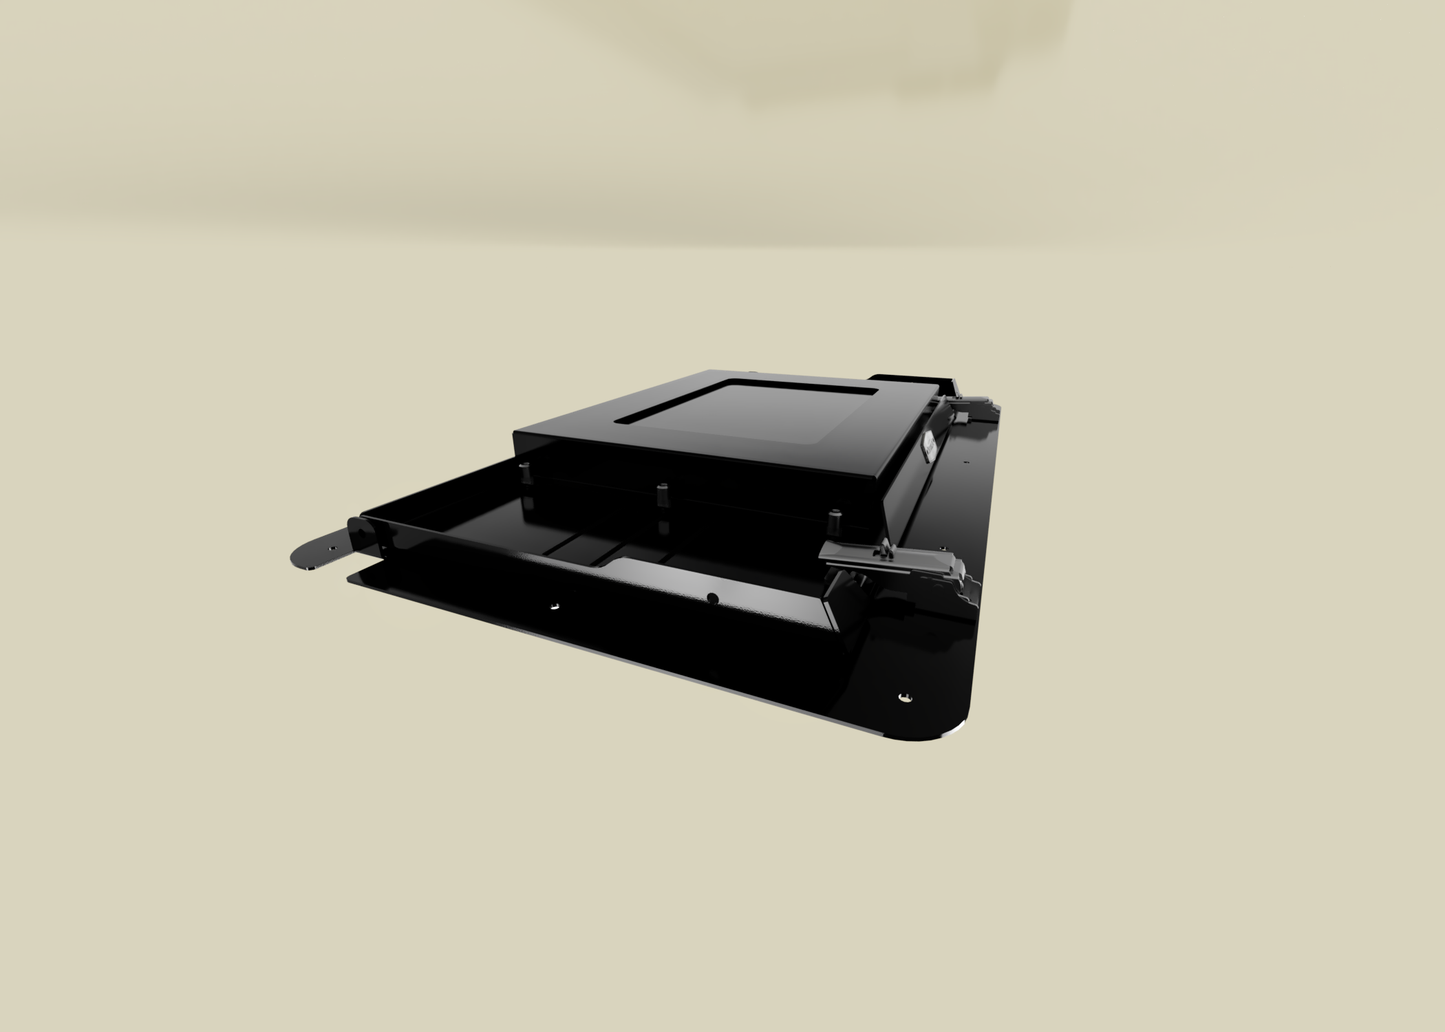 70 Series Outbound Induction Table